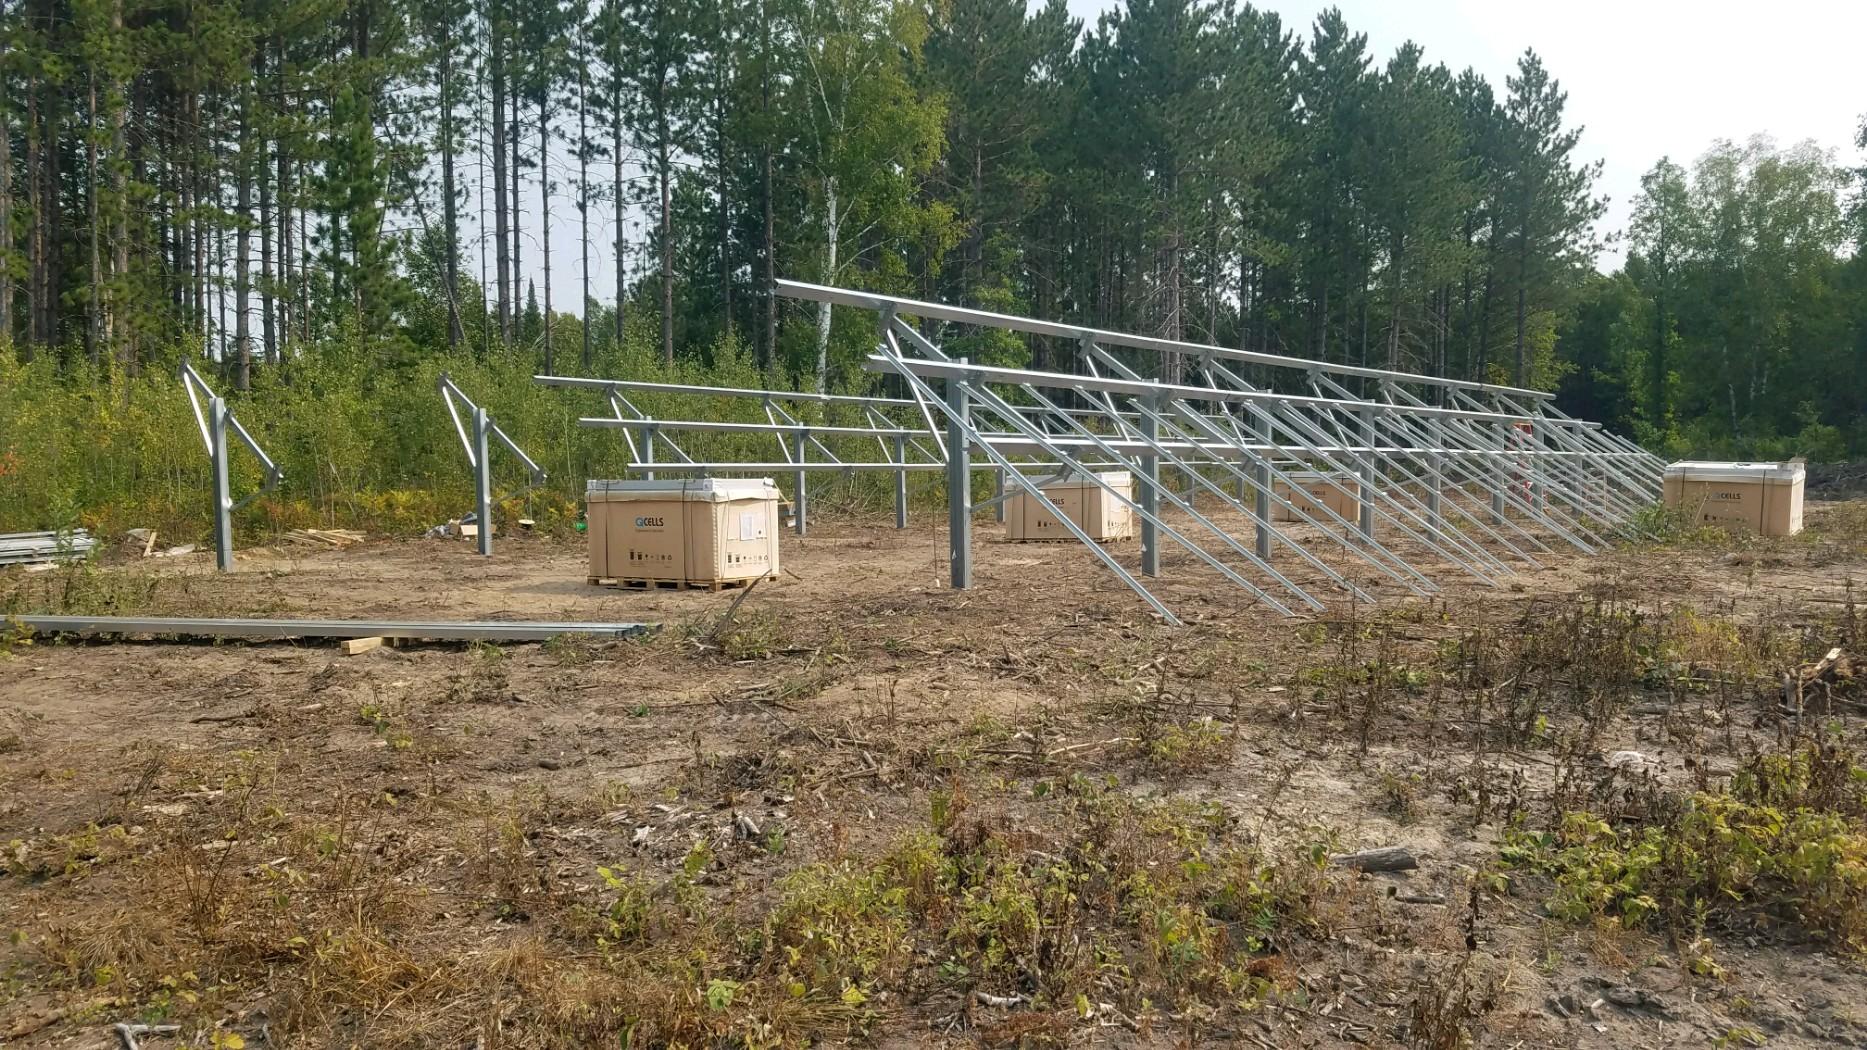 Metal structures for solar panels being set up